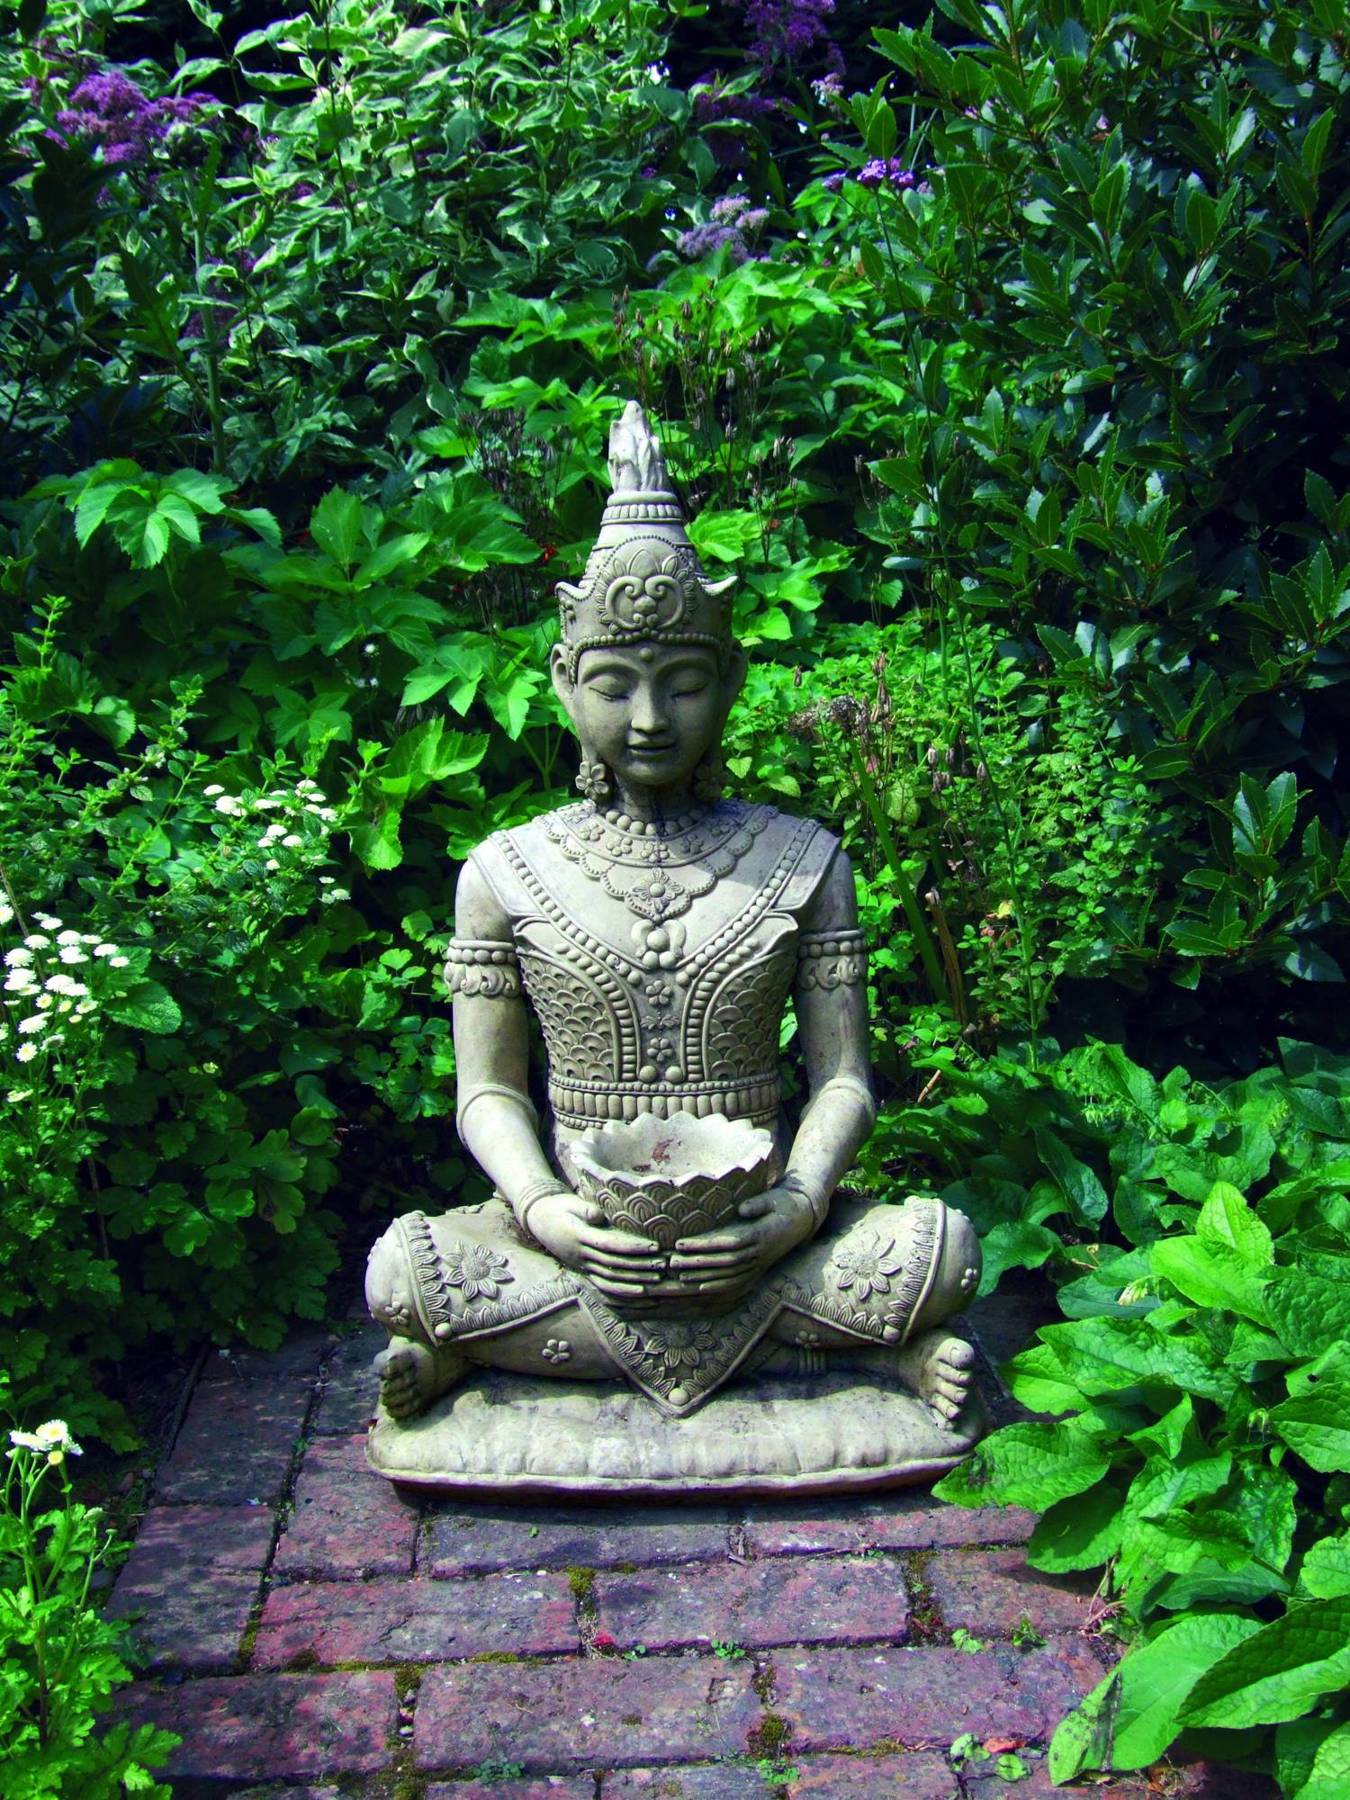 Buddha Garden Ornaments and Statues